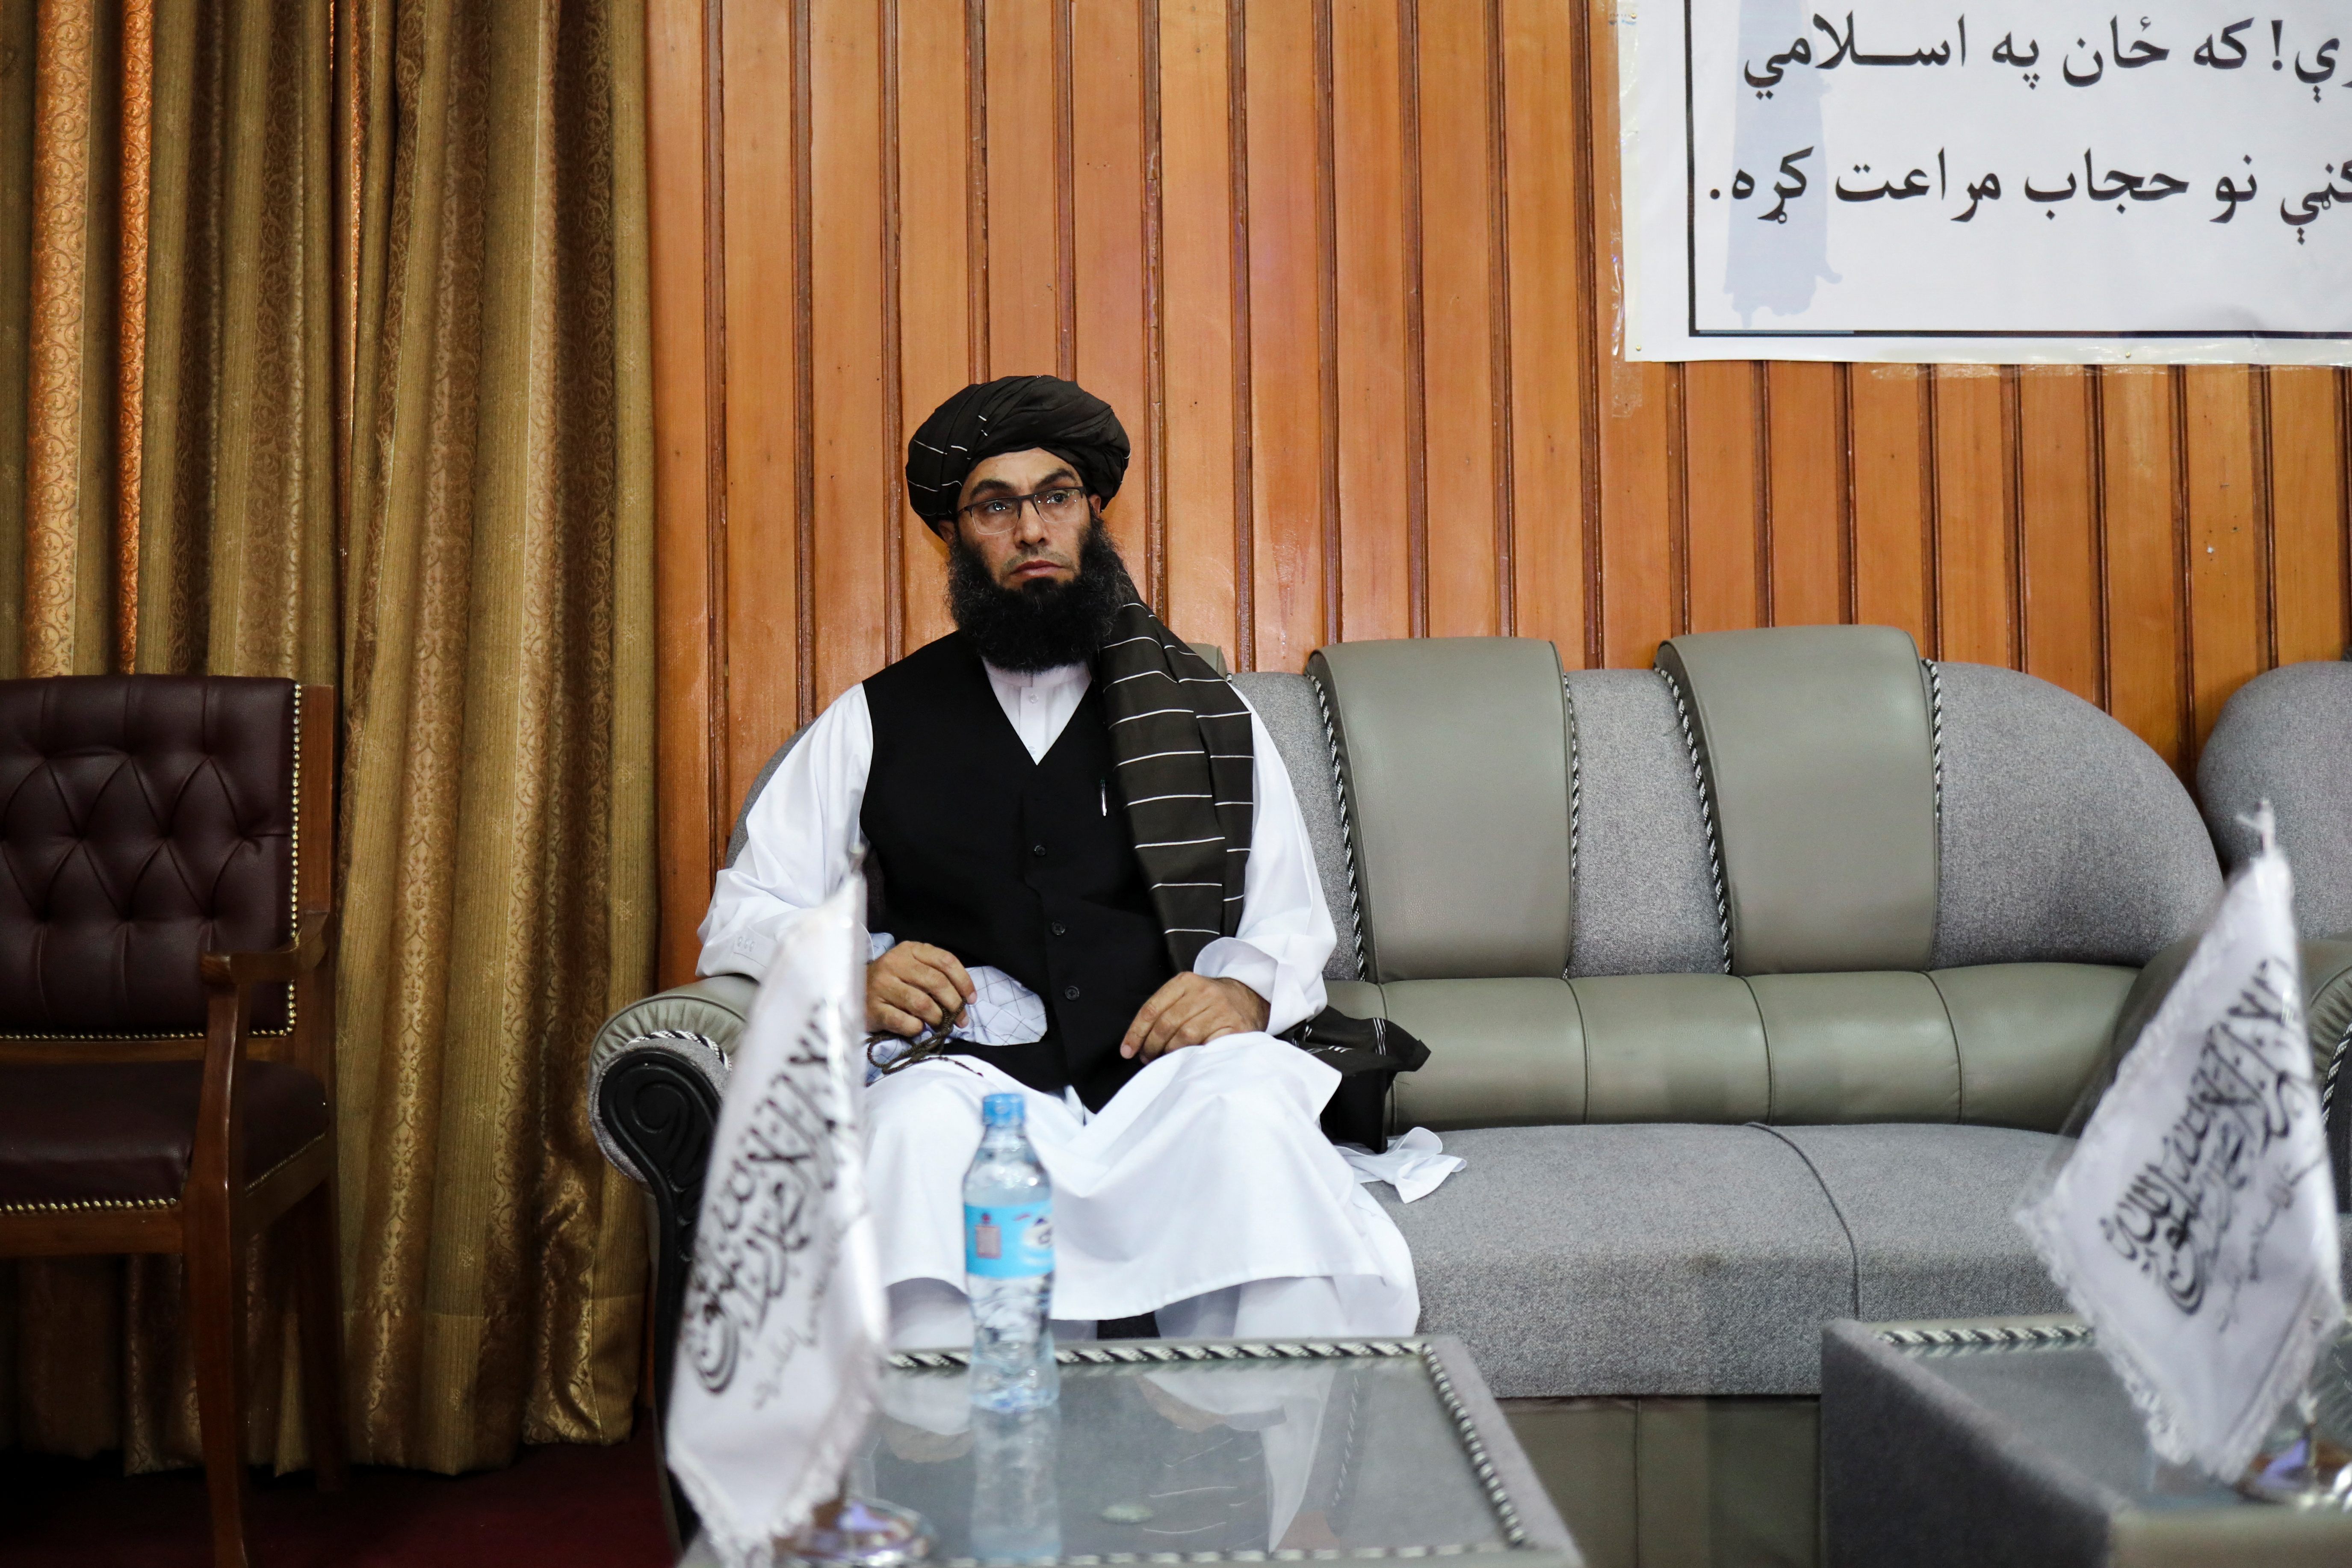 Afghan Taliban's Minister of Virtue and Vice Sheikh Mohammad Khalid attends the news conference about a new command of hijab by Taliban leader Mullah Haibatullah Akhundzada, in Kabul